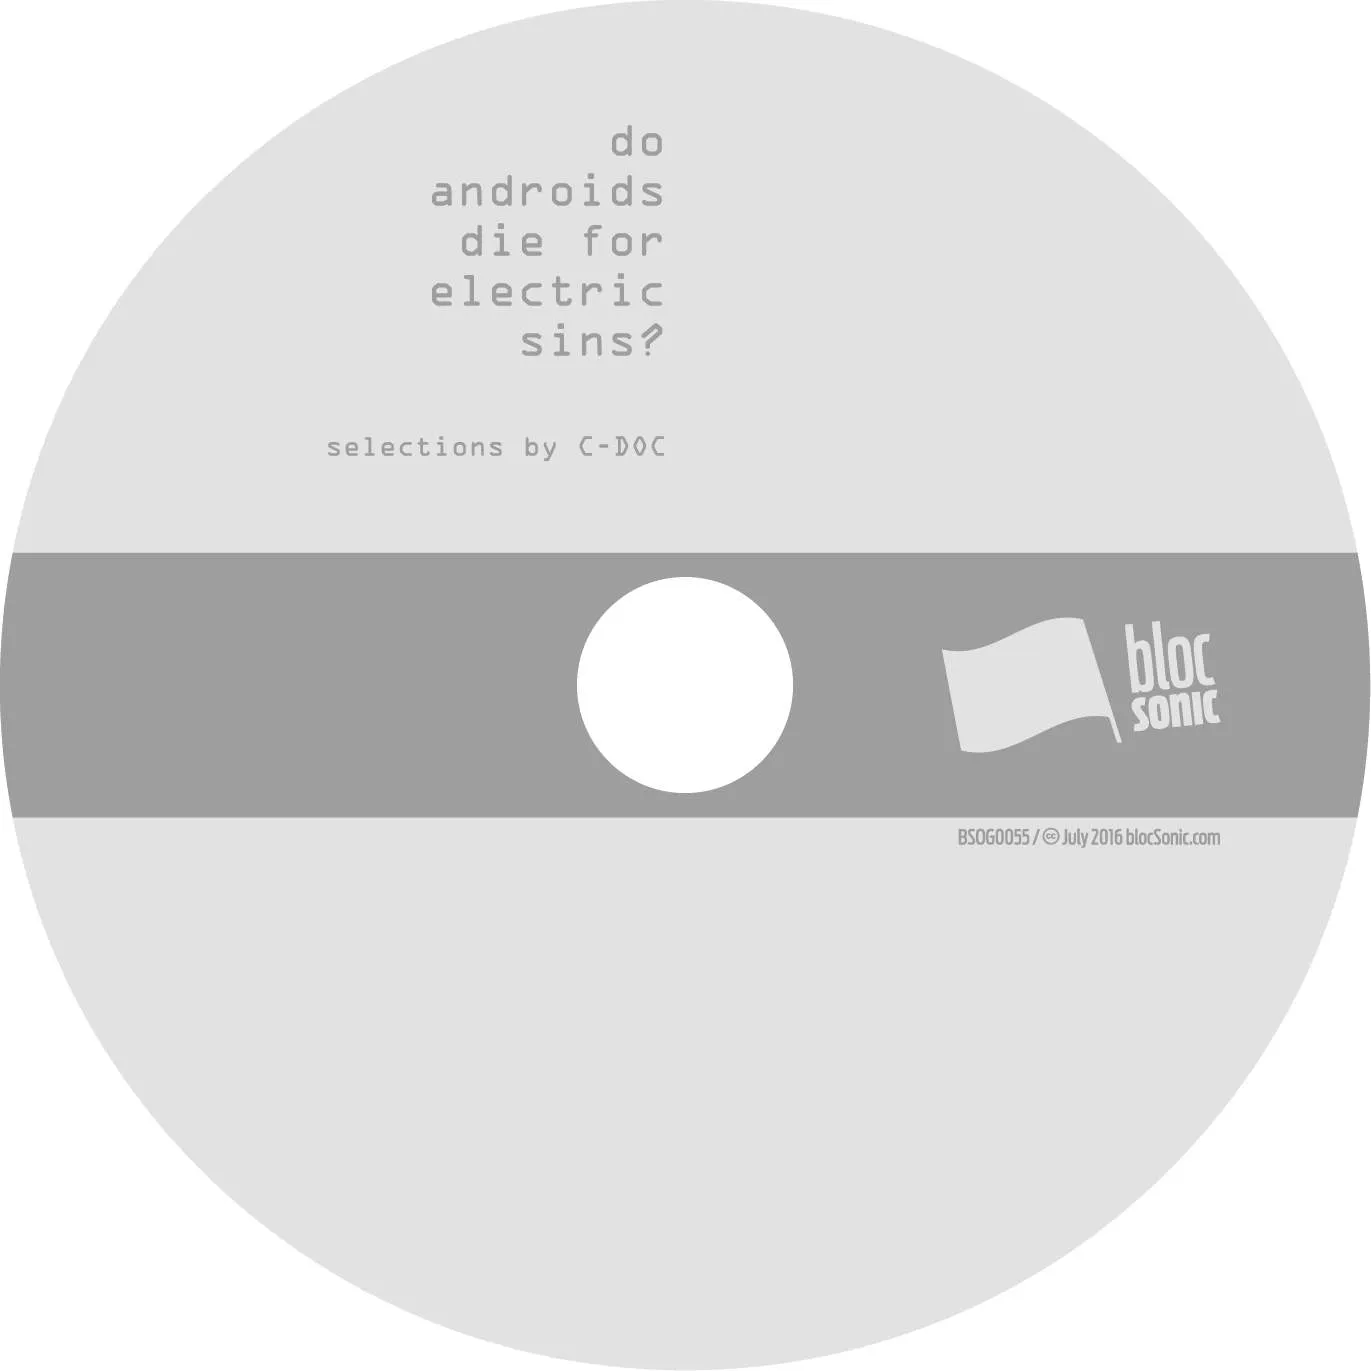 Album disc for “Do Androids Die For Electric Sins?” by C-Doc